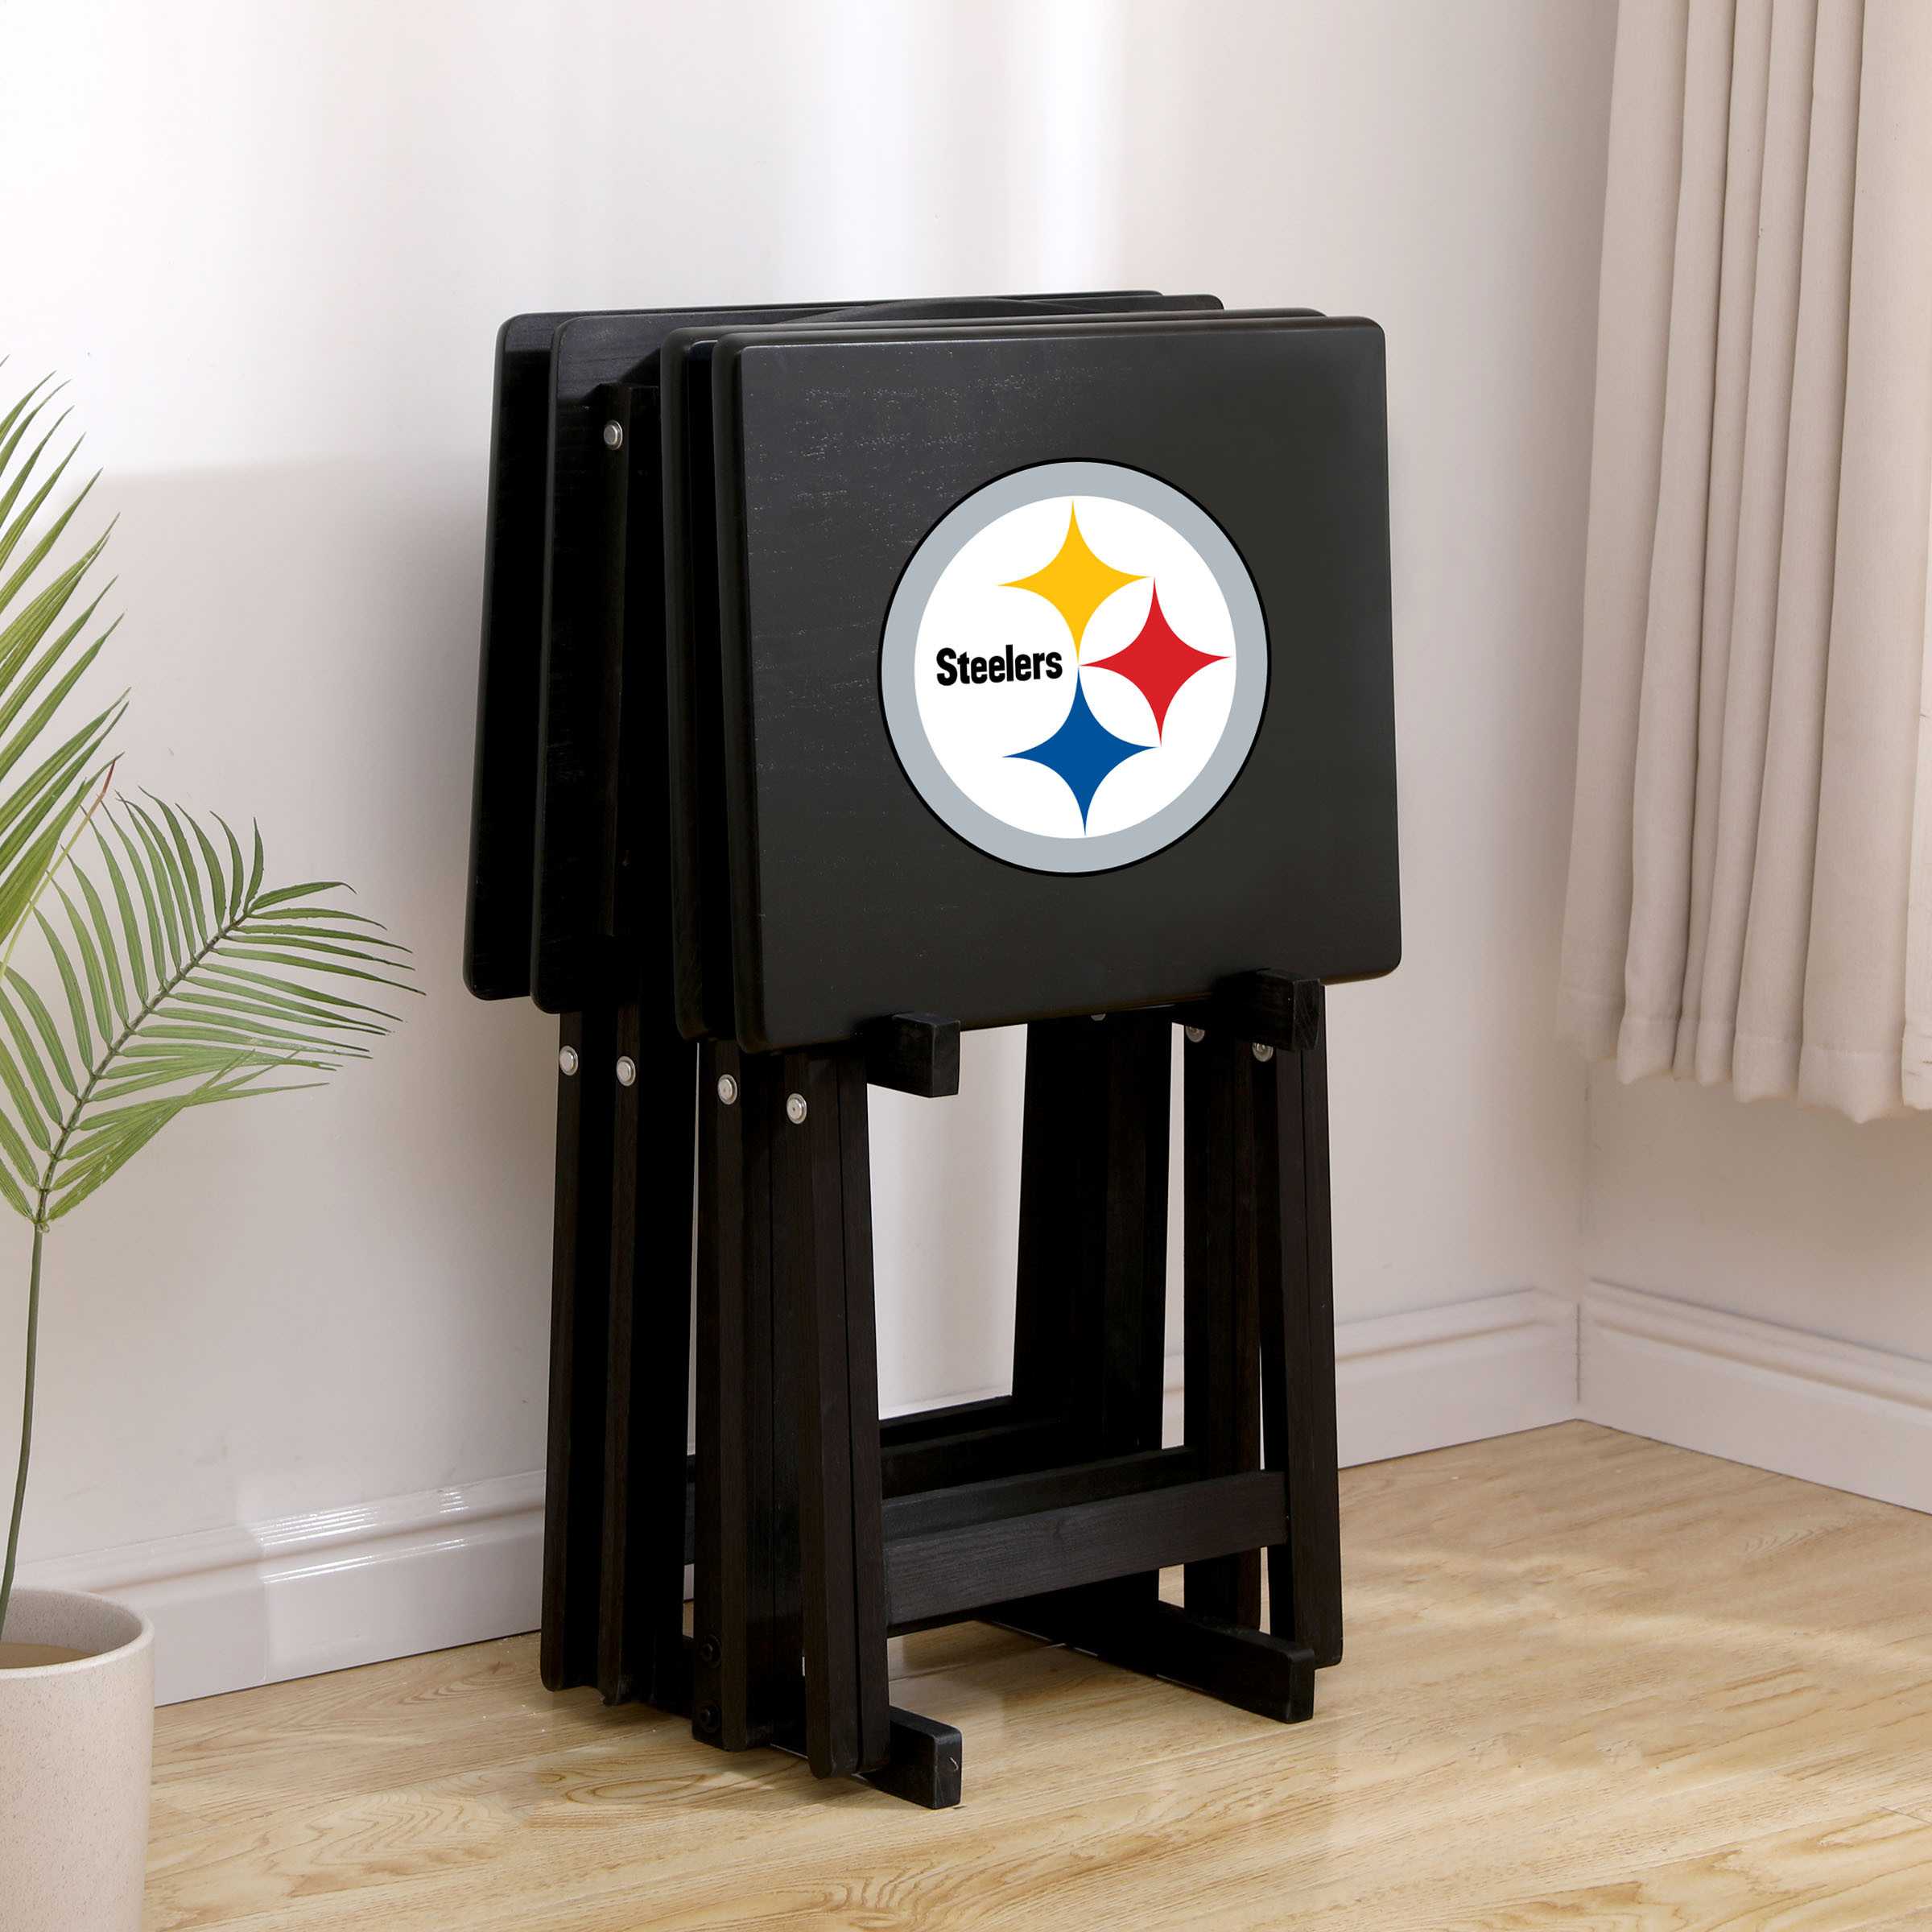 PITTSBURGH STEELERS 4 TV TRAYS WITH STAND